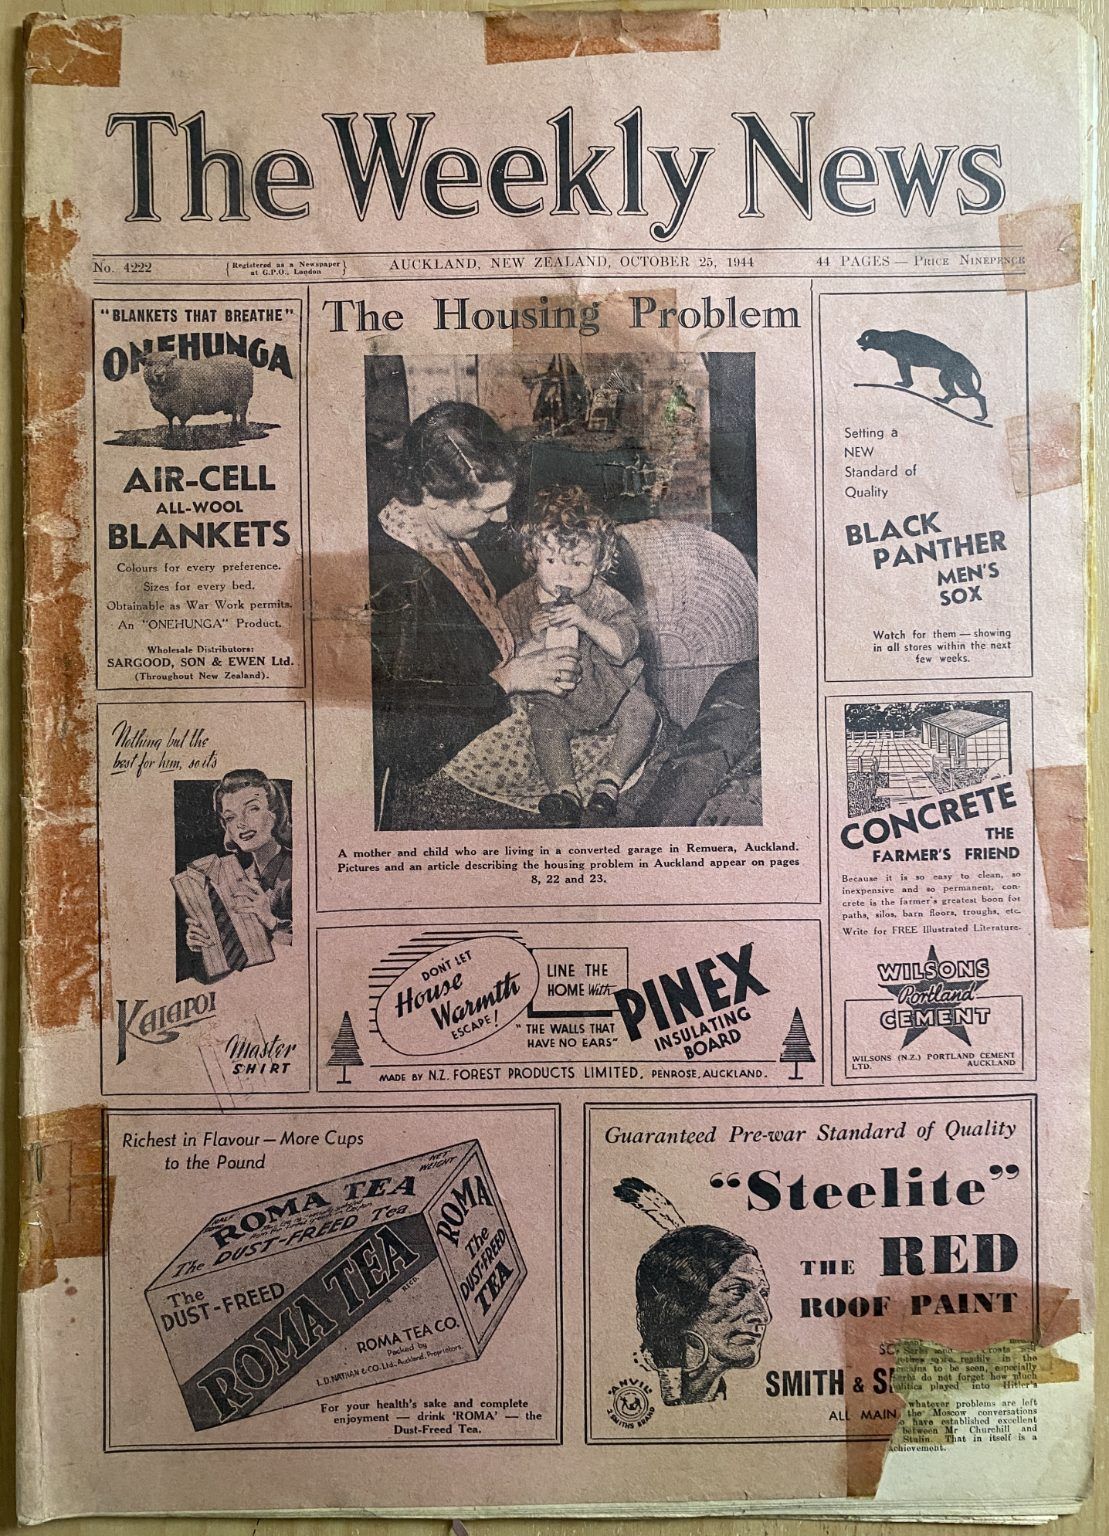 OLD NEWSPAPER: The Weekly News - No. 4222, 25 October 1944